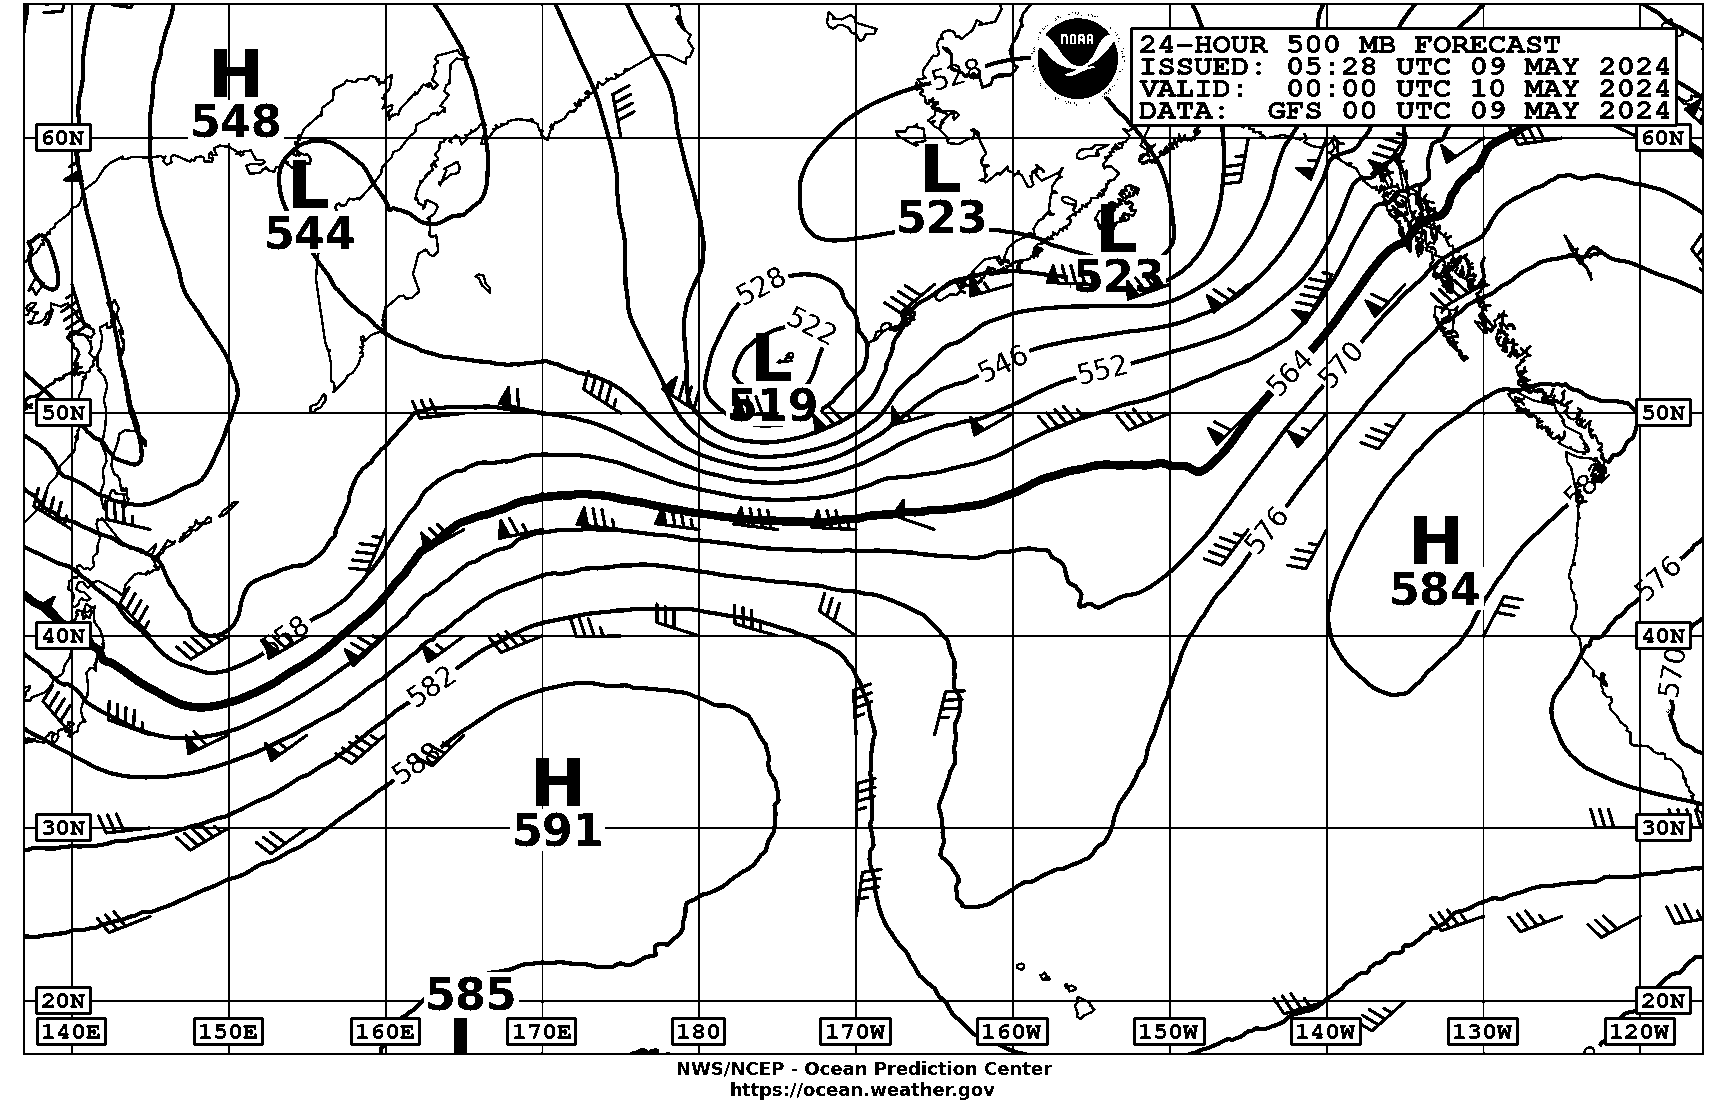 24 hour Pacific 500 mb offshore & adjacent waters